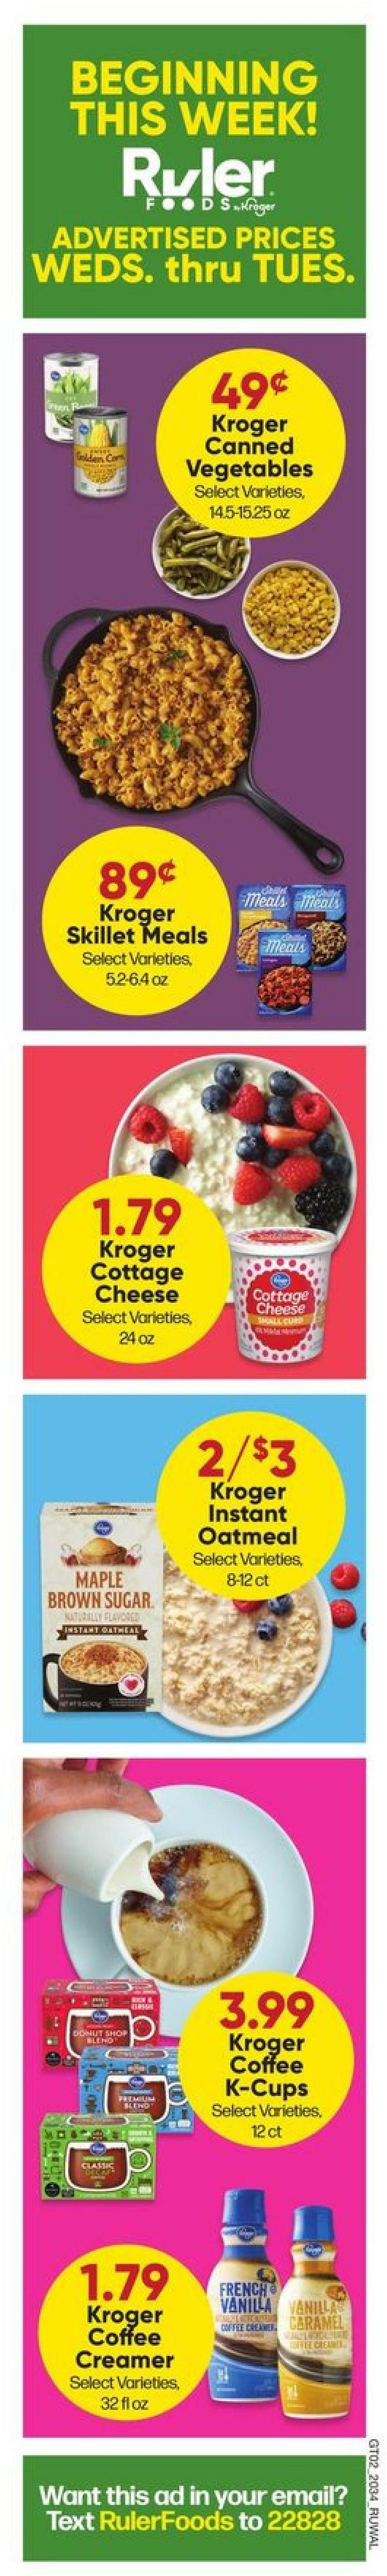 Ruler Foods Weekly Ad from September 23